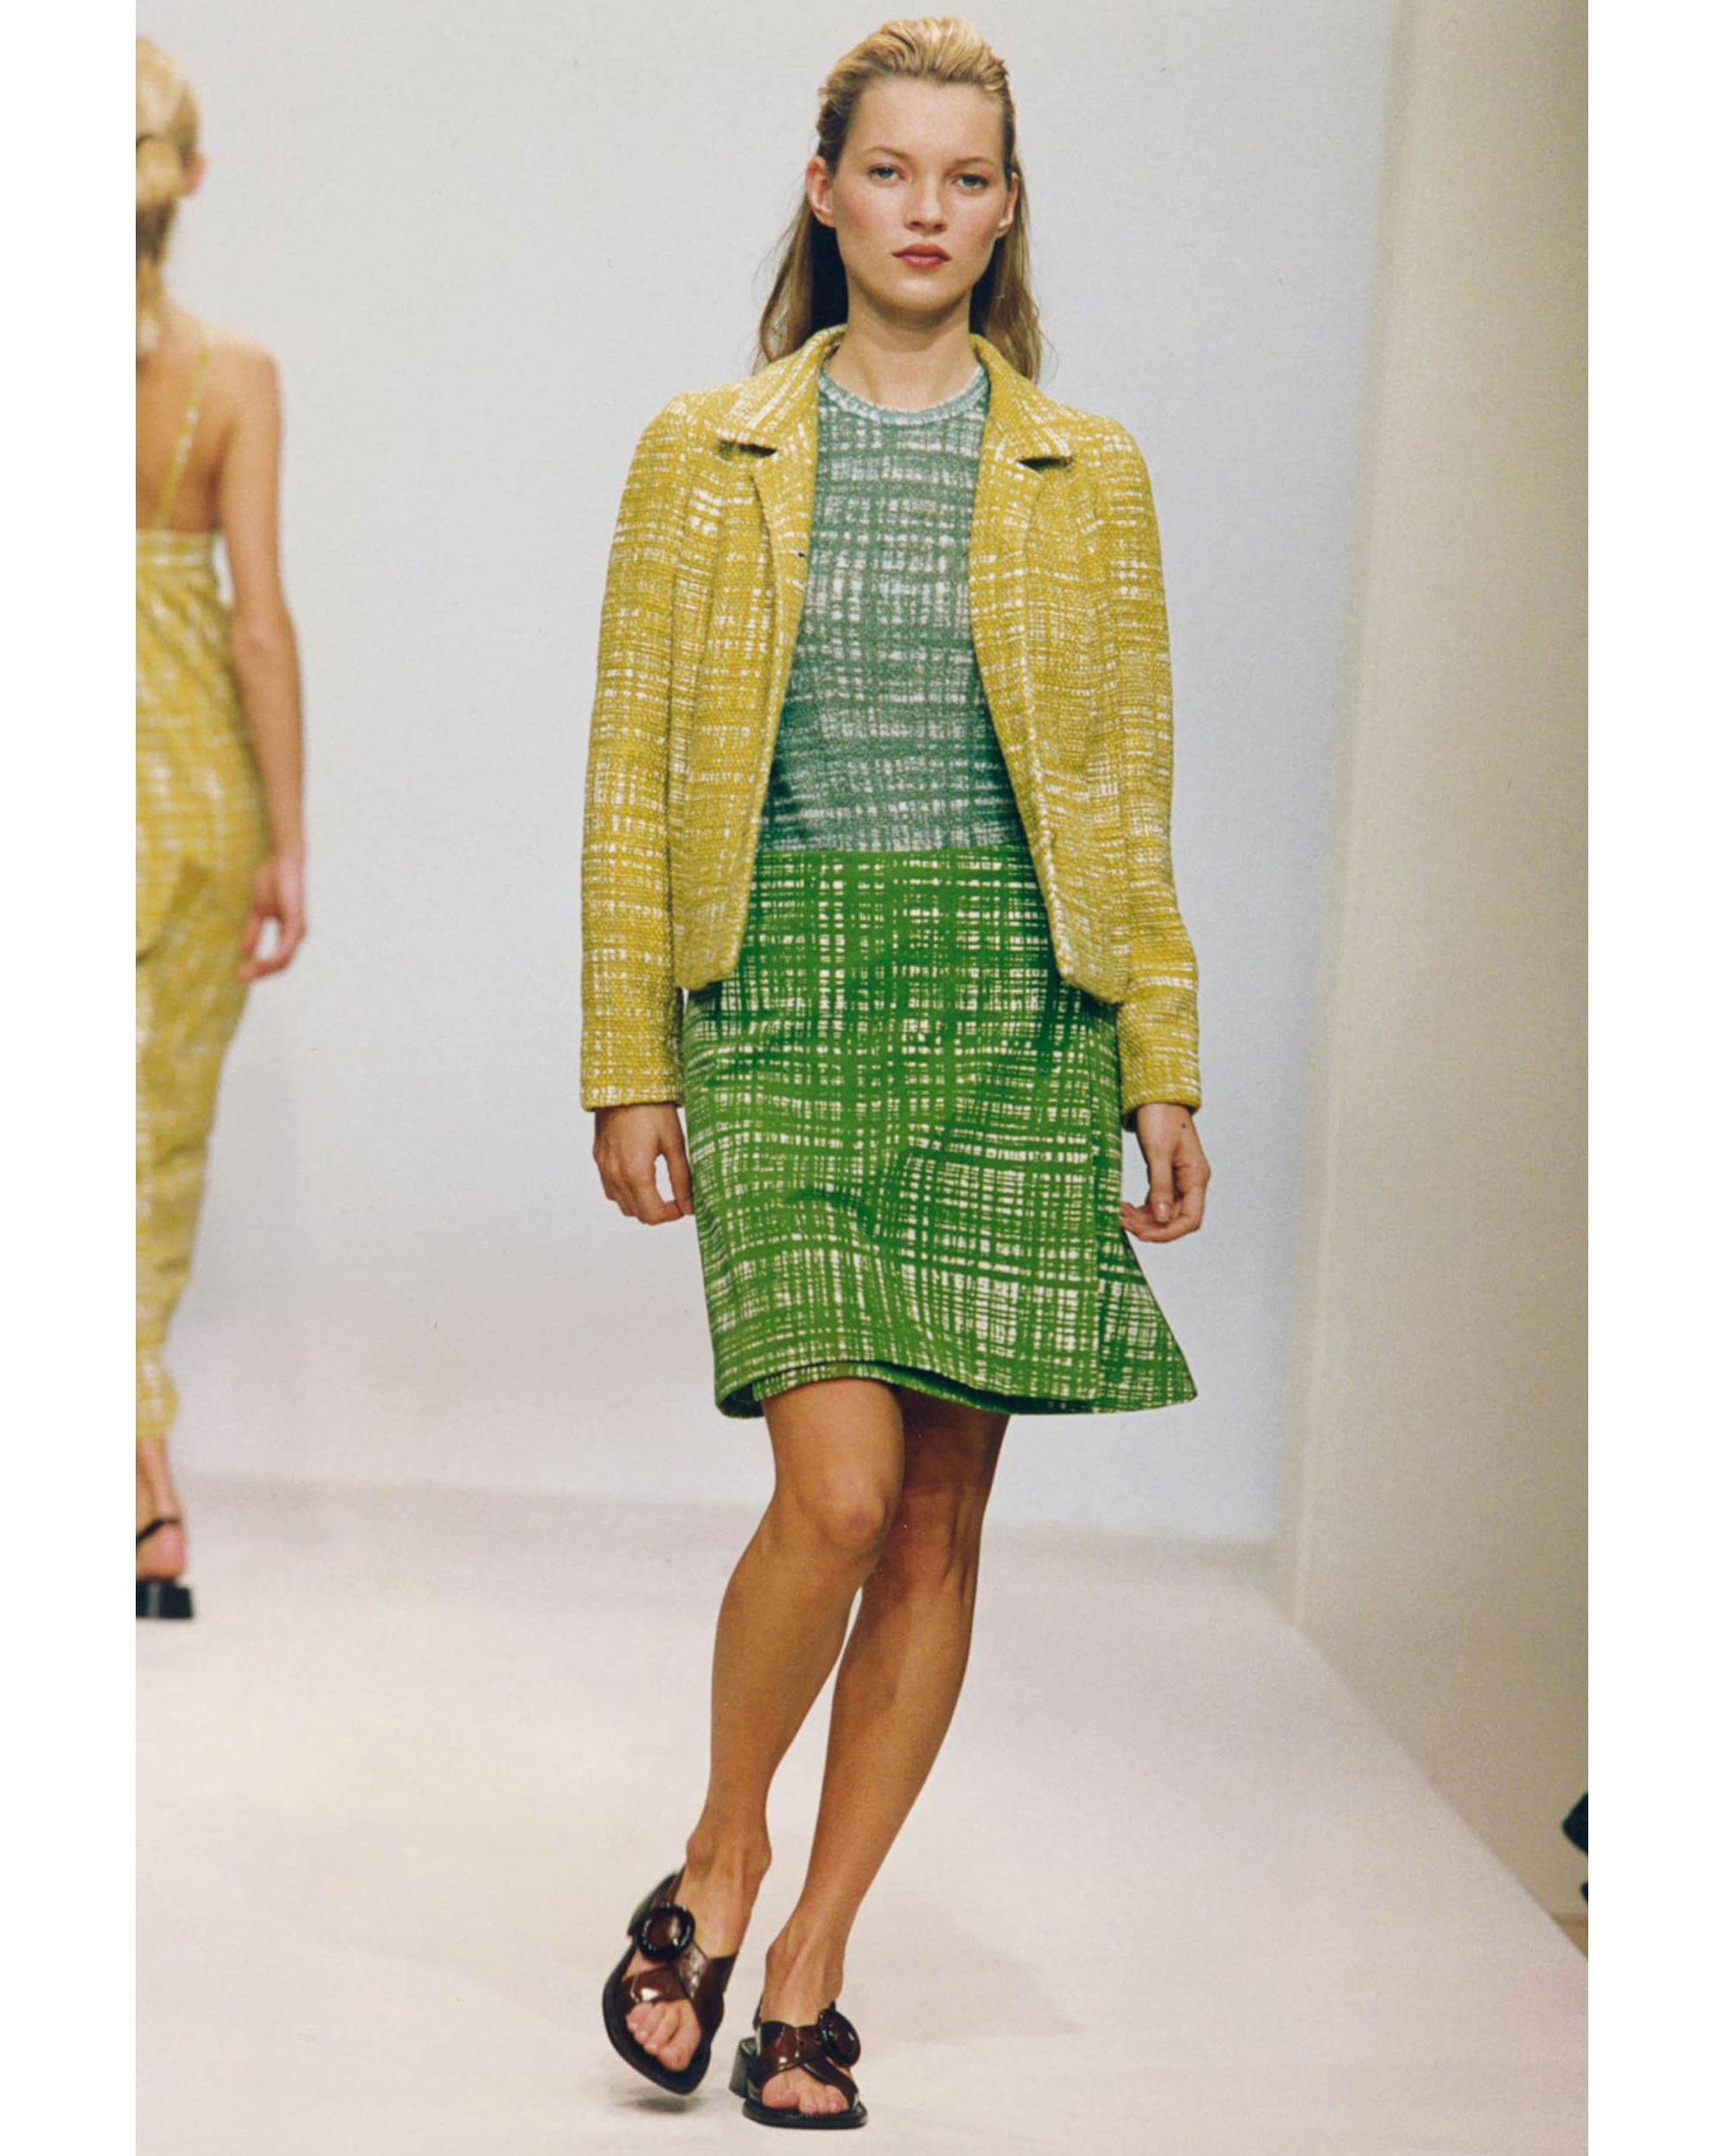 S/S 1996 Prada by Miuccia Prada yellow-green 'ugly chic' tweed skirt set. Collared tweed blazer jacket with four yellow-green front button closures pairs with matching tweed mini skirt with concealed zip closure. Fabric Contents: 50% Cotton; 50%